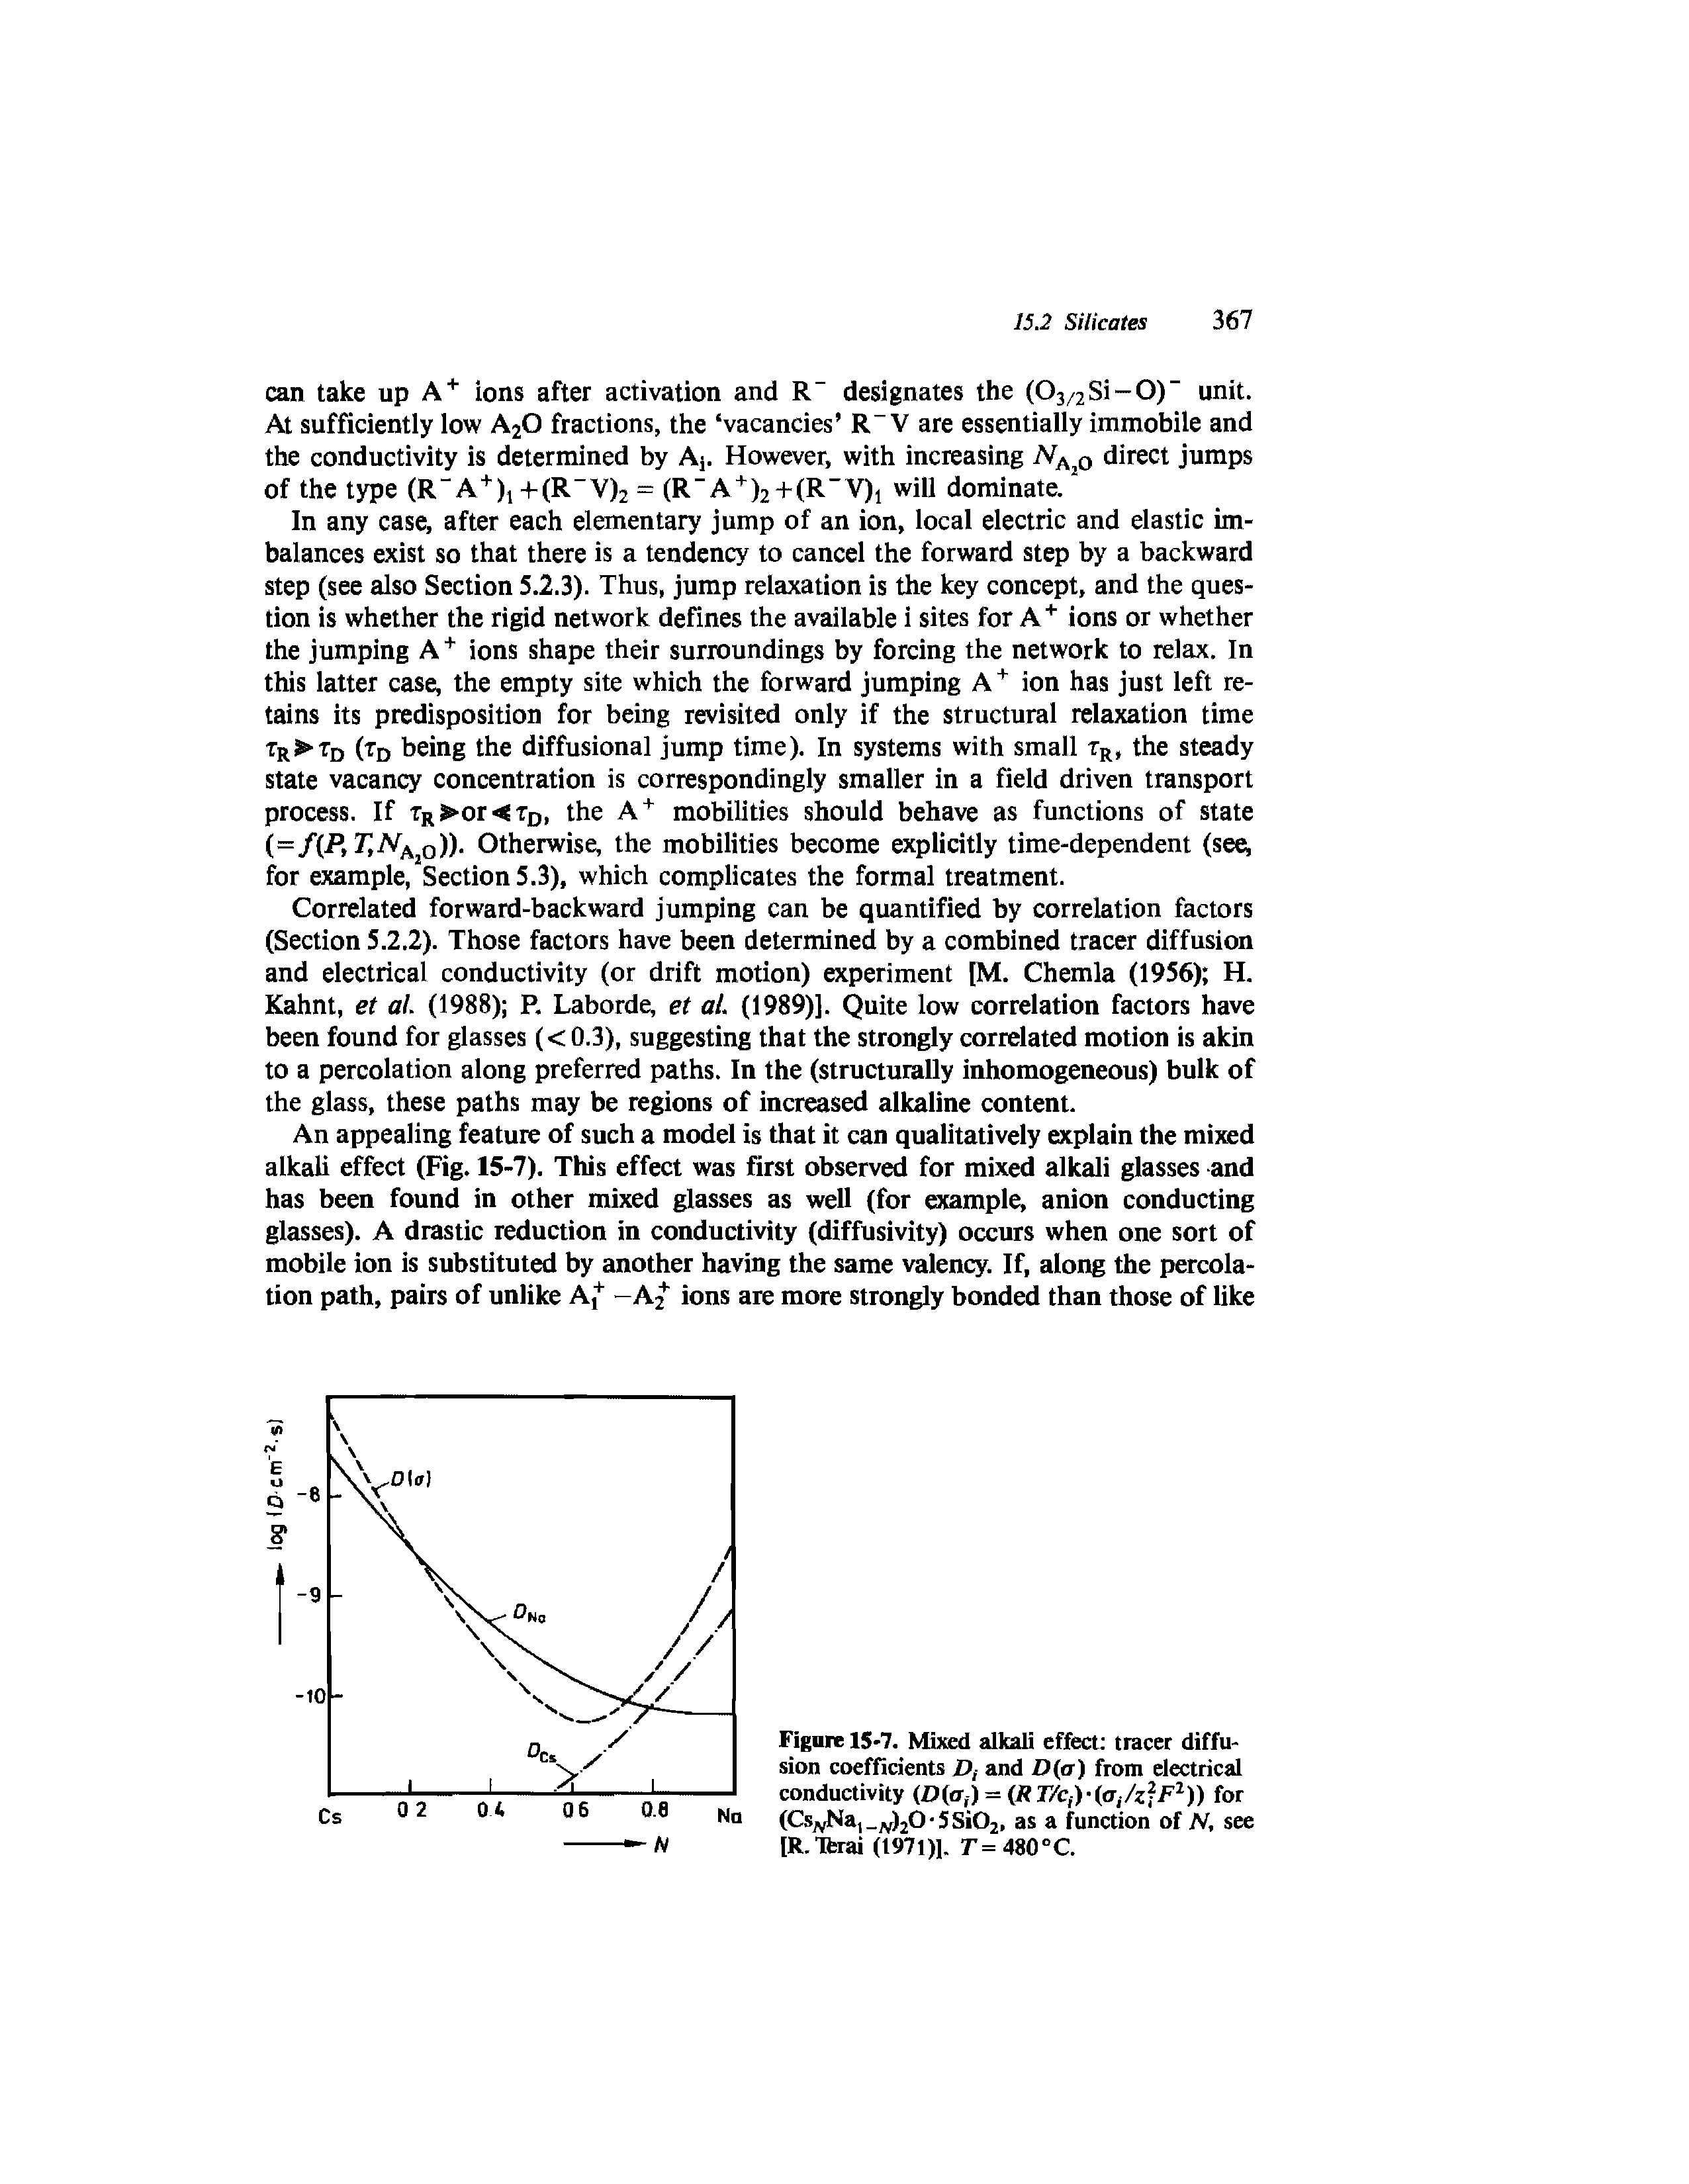 Figure 15-7. Mixed alkali effect tracer diffusion coefficients ), and D(a) from electrical conductivity (D(a ) = (R T/c -ia zfF1)) for (Cs Na, N)20 5 Si02, as a function of N, see [R. Tferai (1971)]. T = 480 °C.